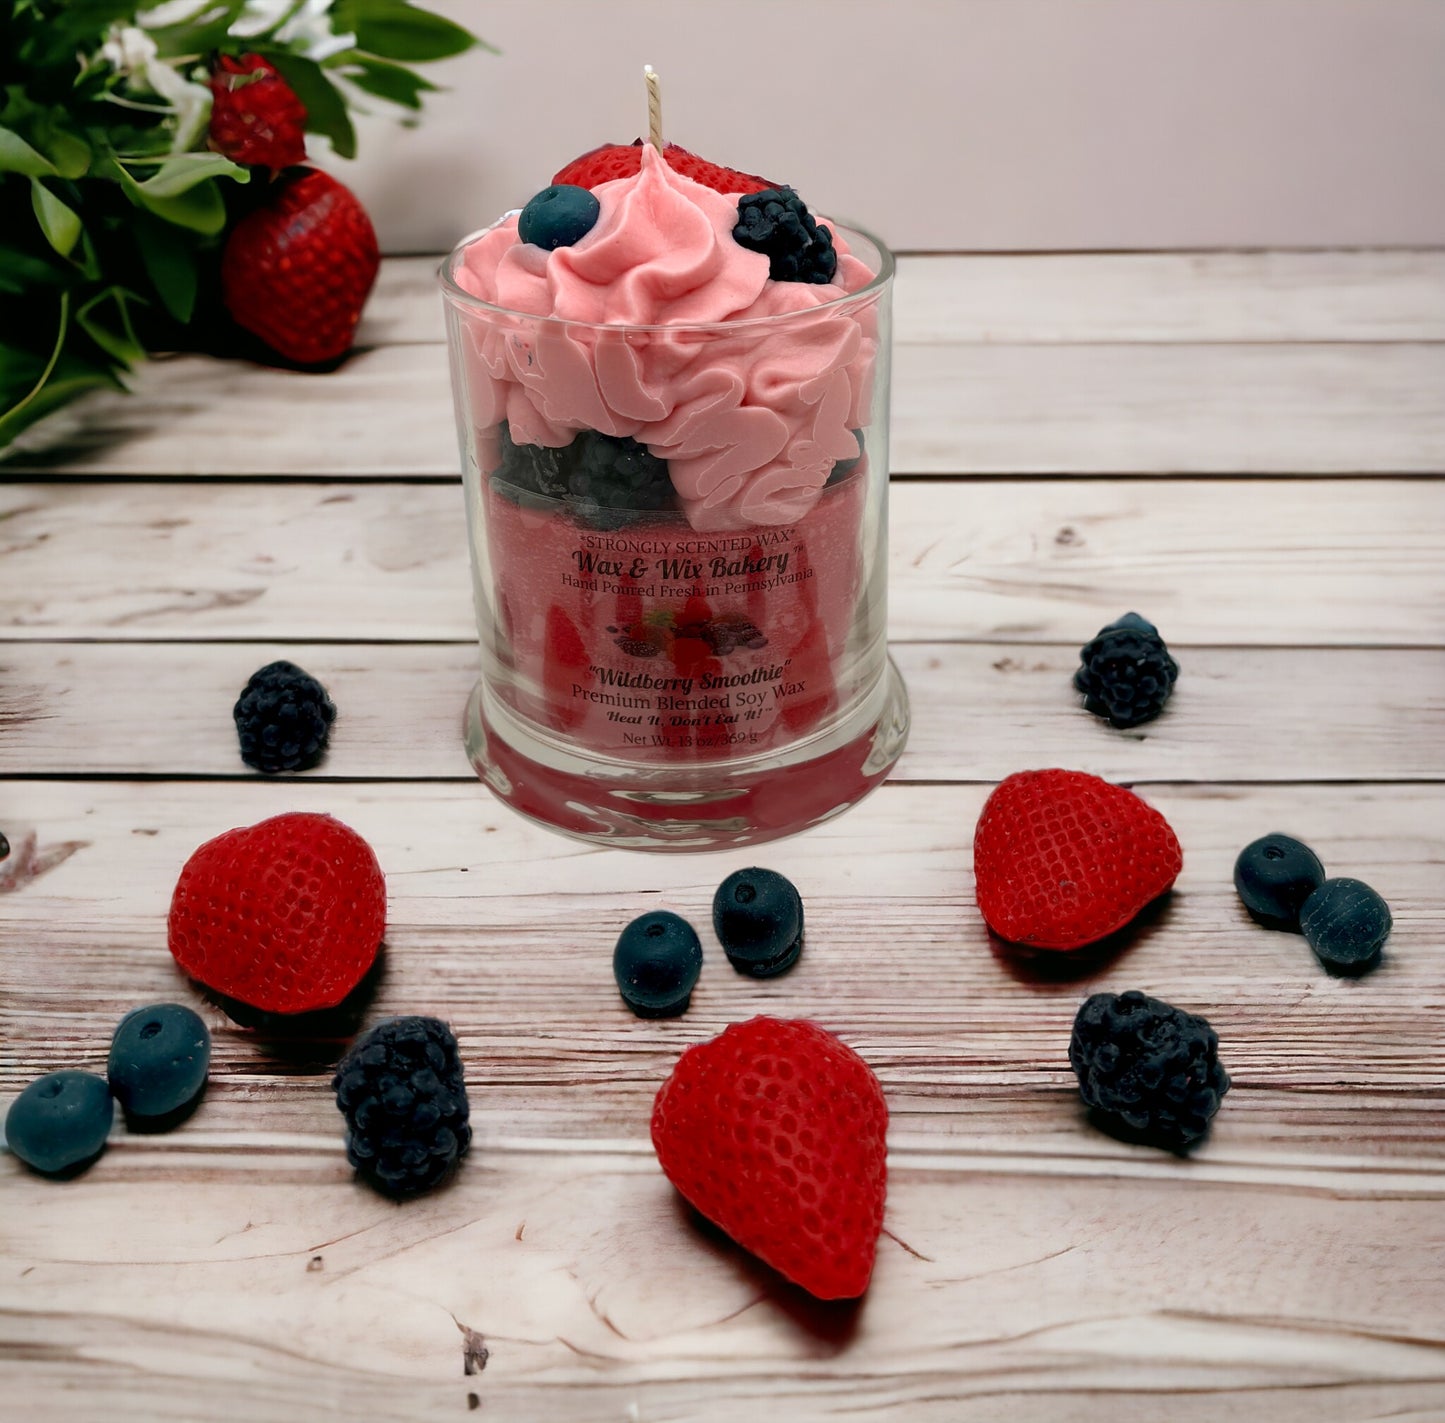 Wildberry Smoothie Candle. 13 oz. Soy Candle/Strawberries, Blueberries, Blackberries. Strongly Scented Candle.